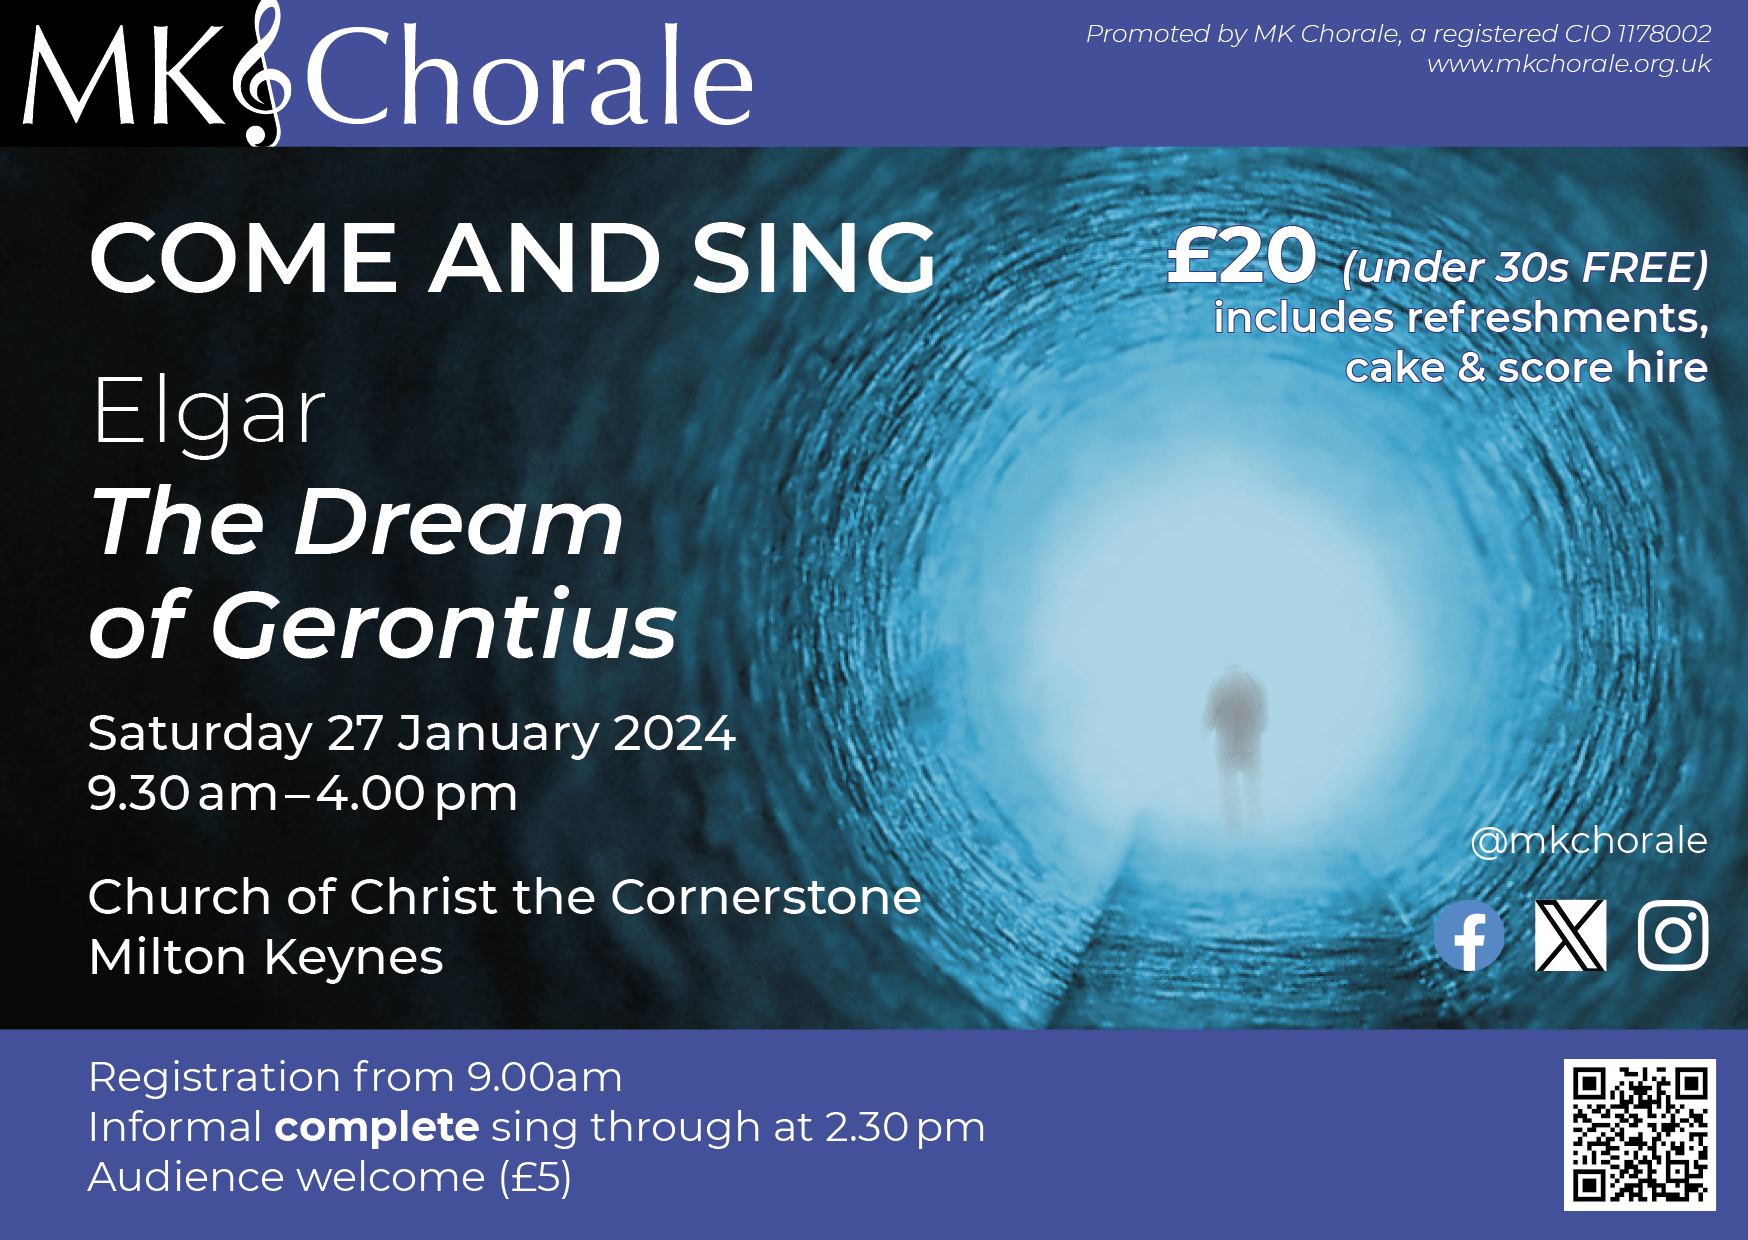 Come and Sing Elgar: The Dream of Gerontius